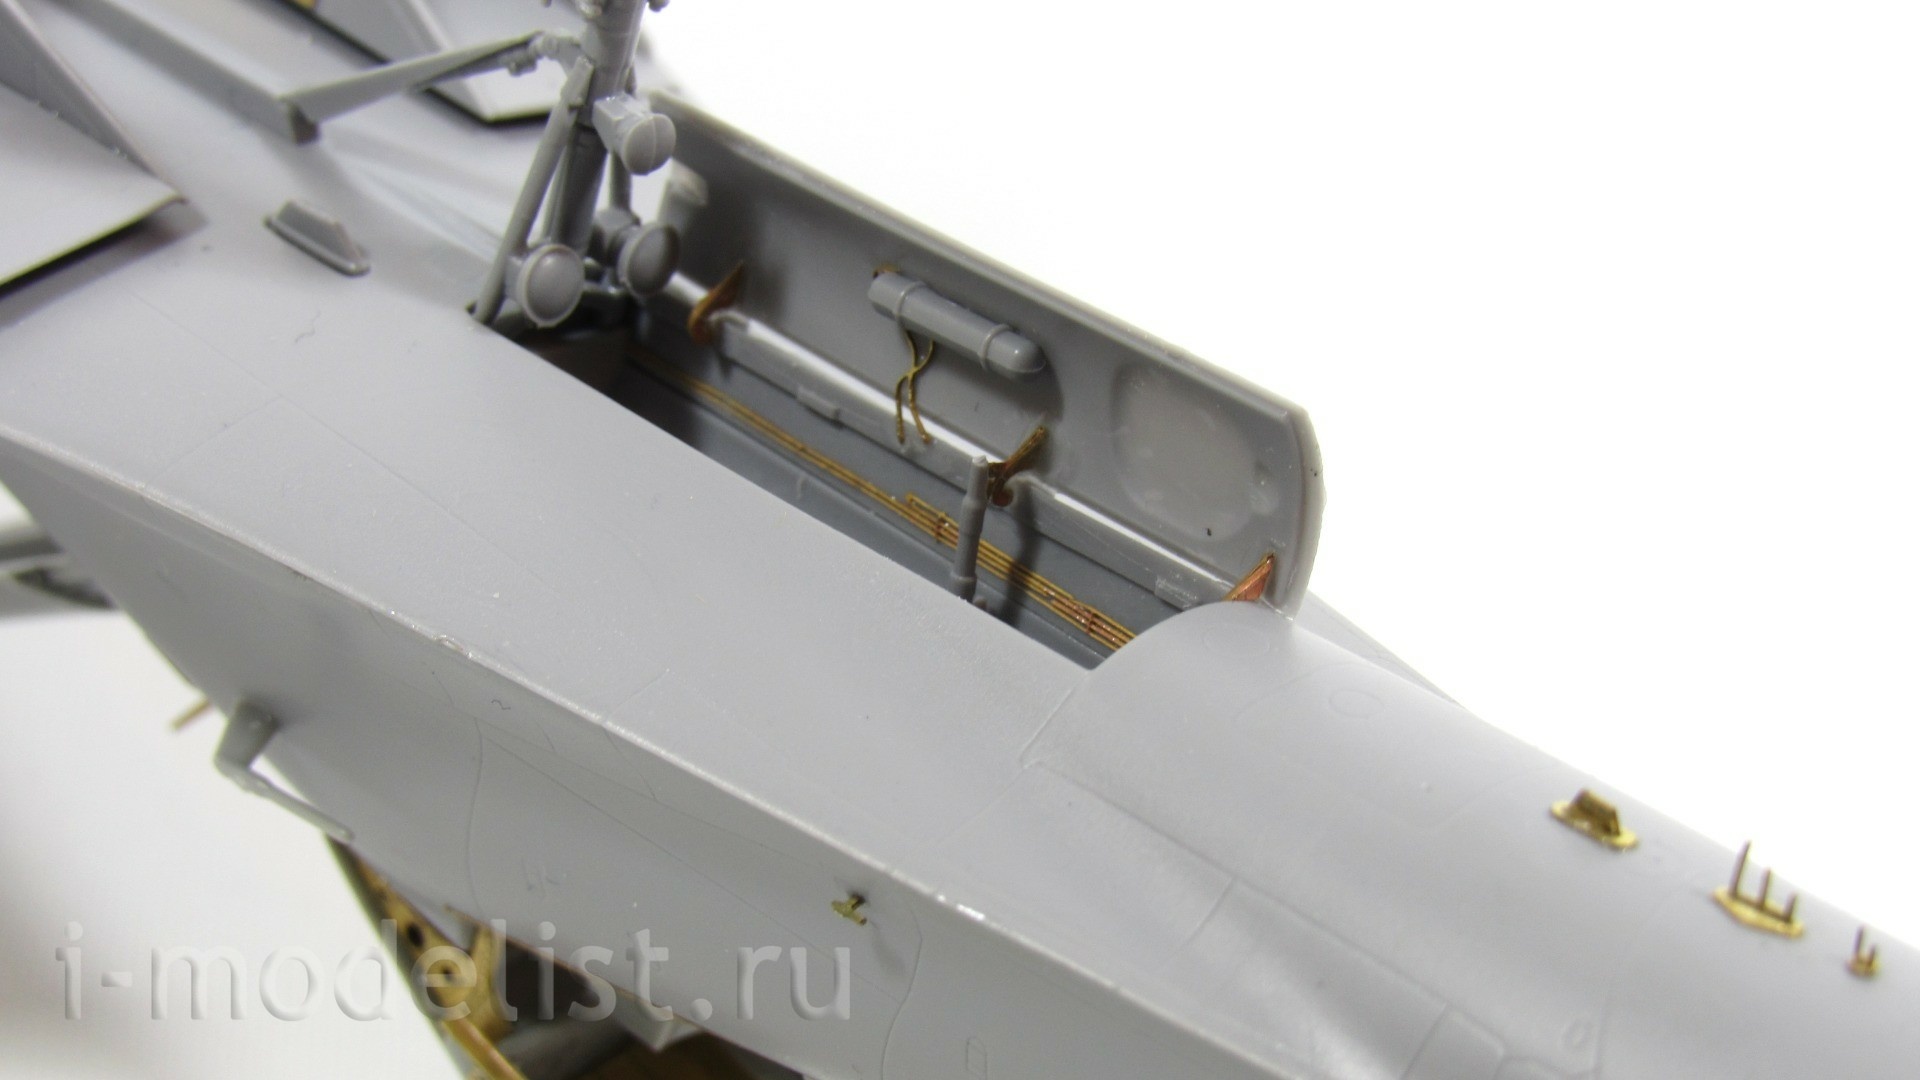 072228 Microdesign 1/72 HYDRAULIC system of the CHASSIS of the AIRCRAFT SU-27